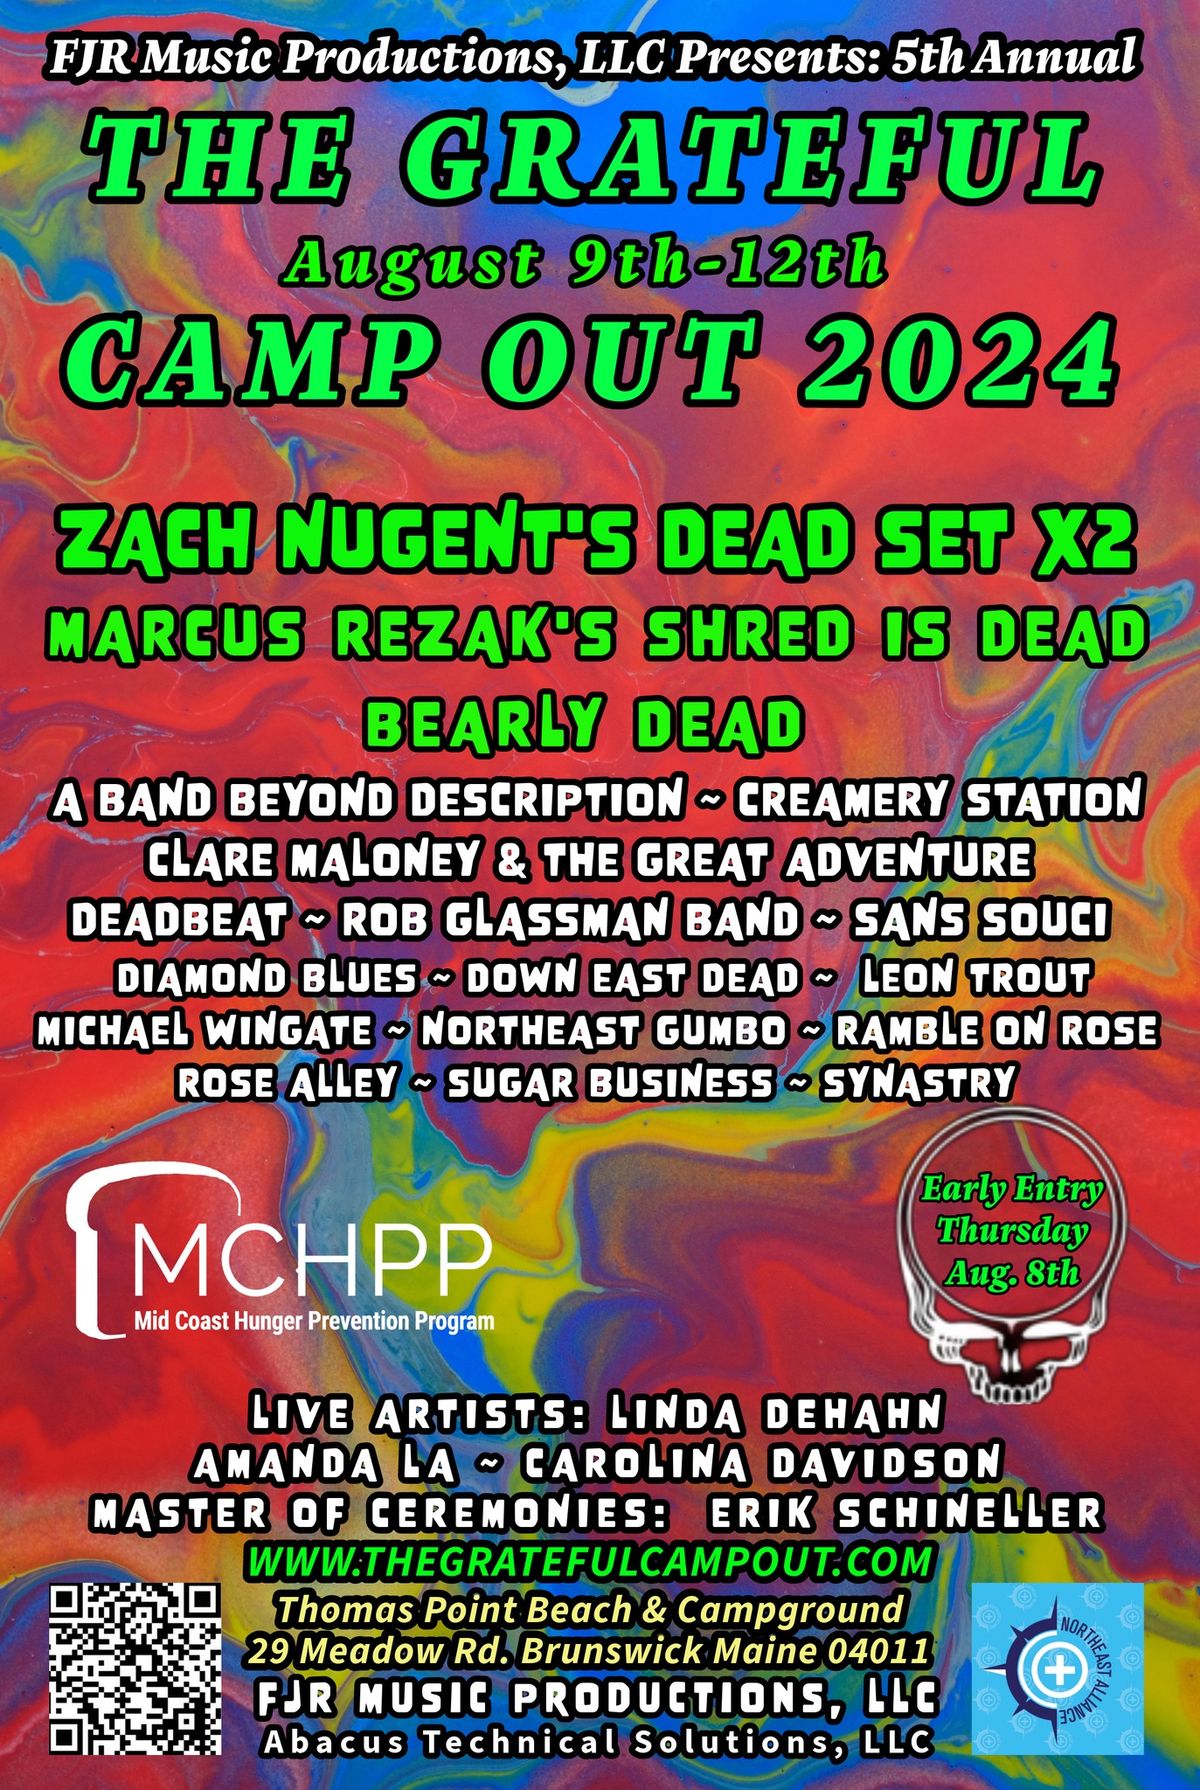 The Grateful Camp Out 2024